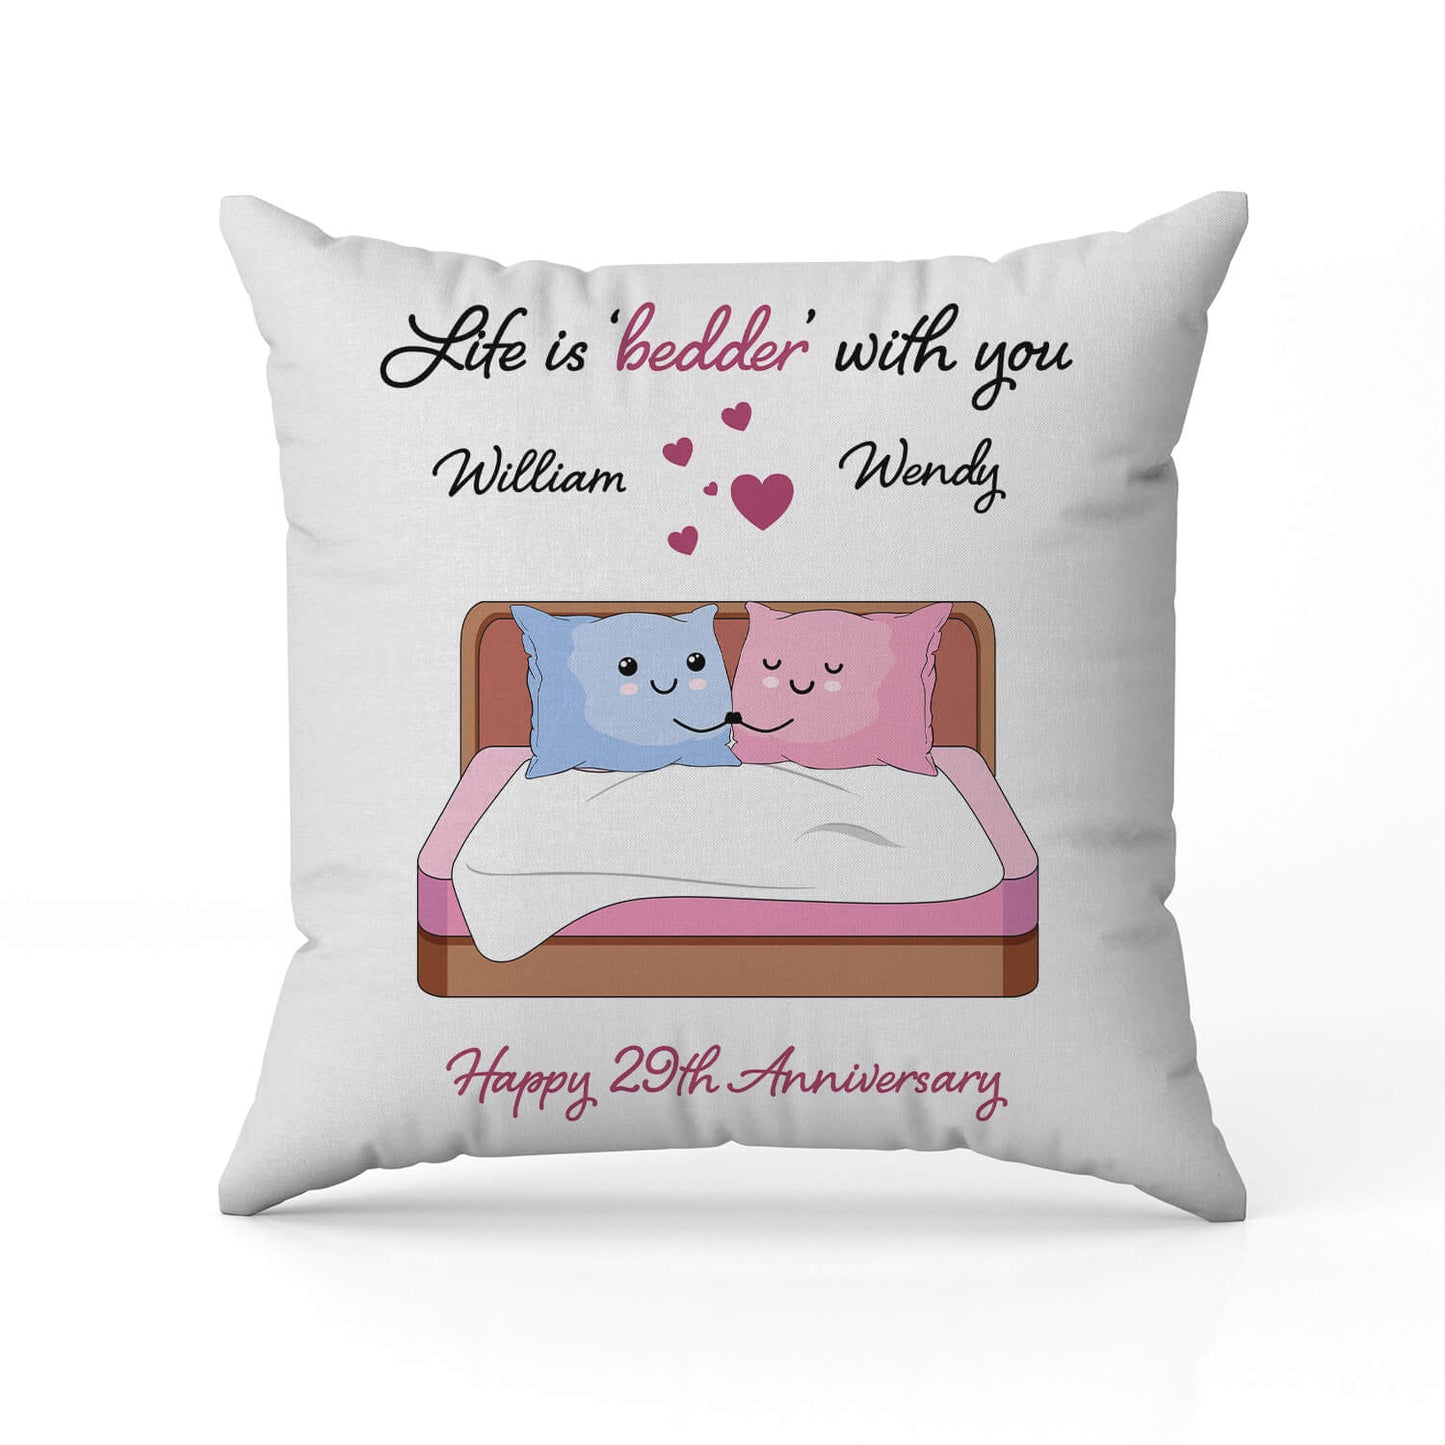 Life Is Bedder With You - Personalized 29 Year Anniversary gift For Husband or Wife - Custom Pillow - MyMindfulGifts